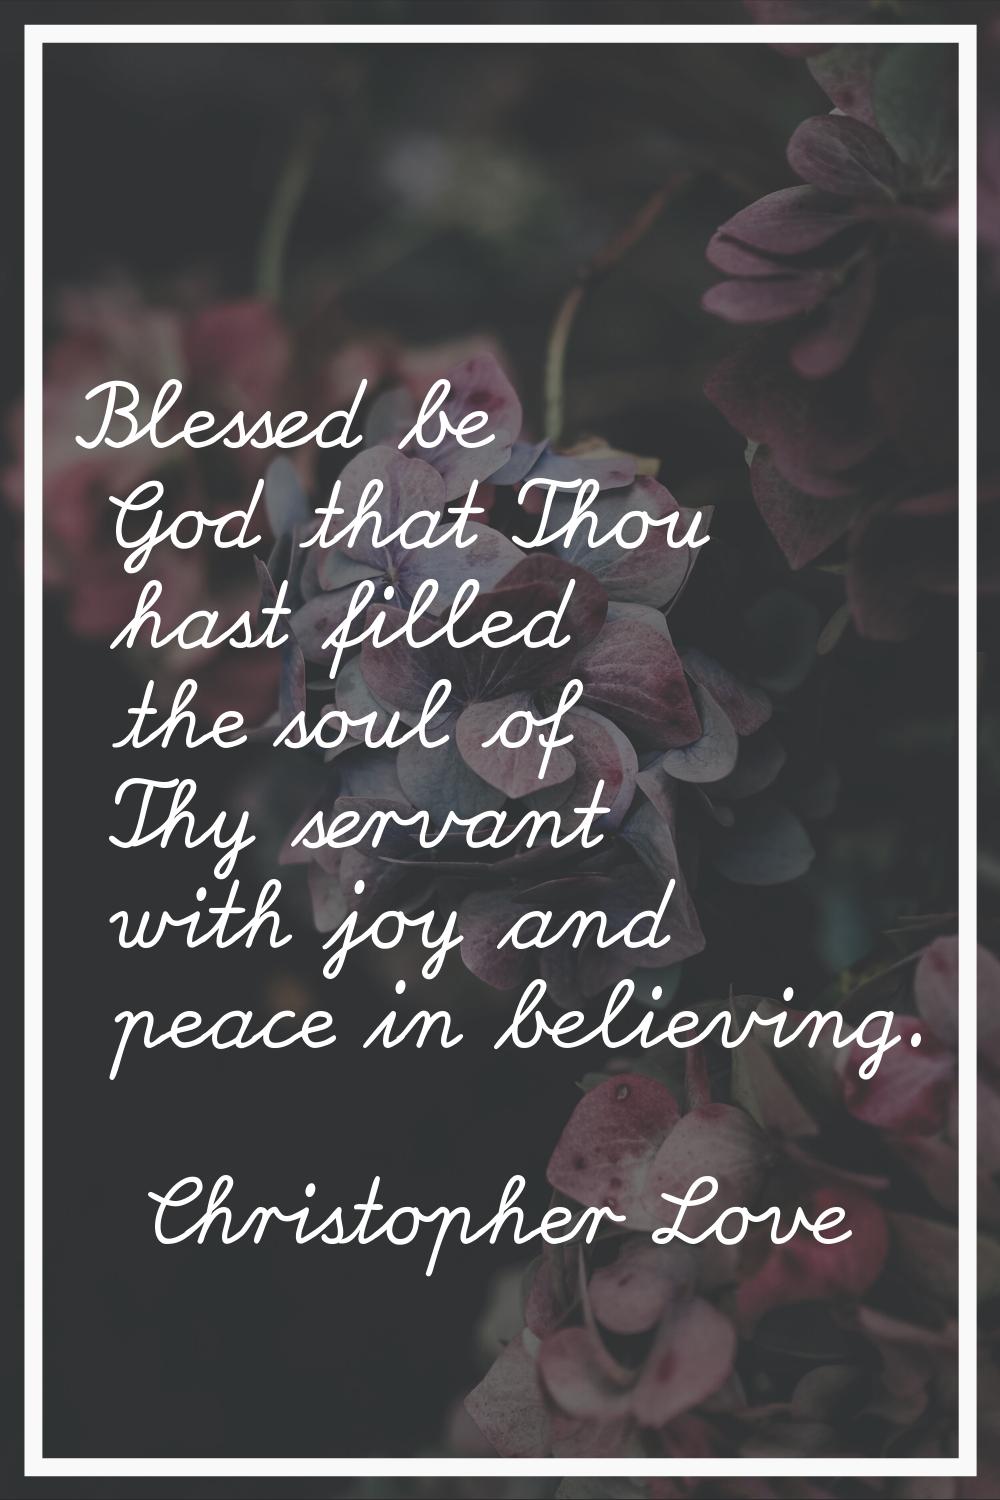 Blessed be God that Thou hast filled the soul of Thy servant with joy and peace in believing.